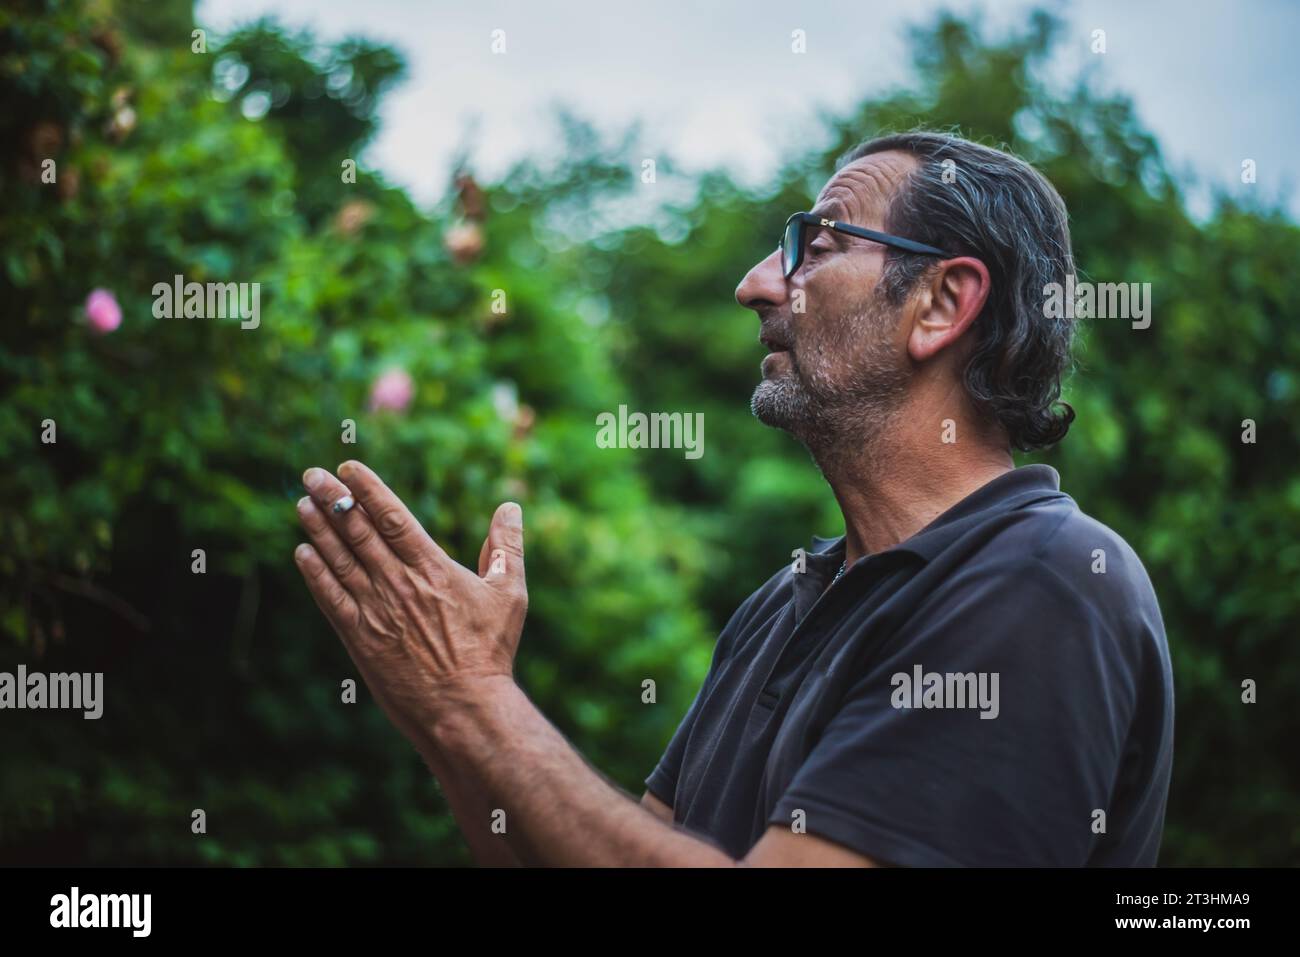 Amidst nature's embrace, a lively 60-year-old Serbian gentleman, wearing glasses and sporting long hair, engages in animated conversations outdoors, h Stock Photo